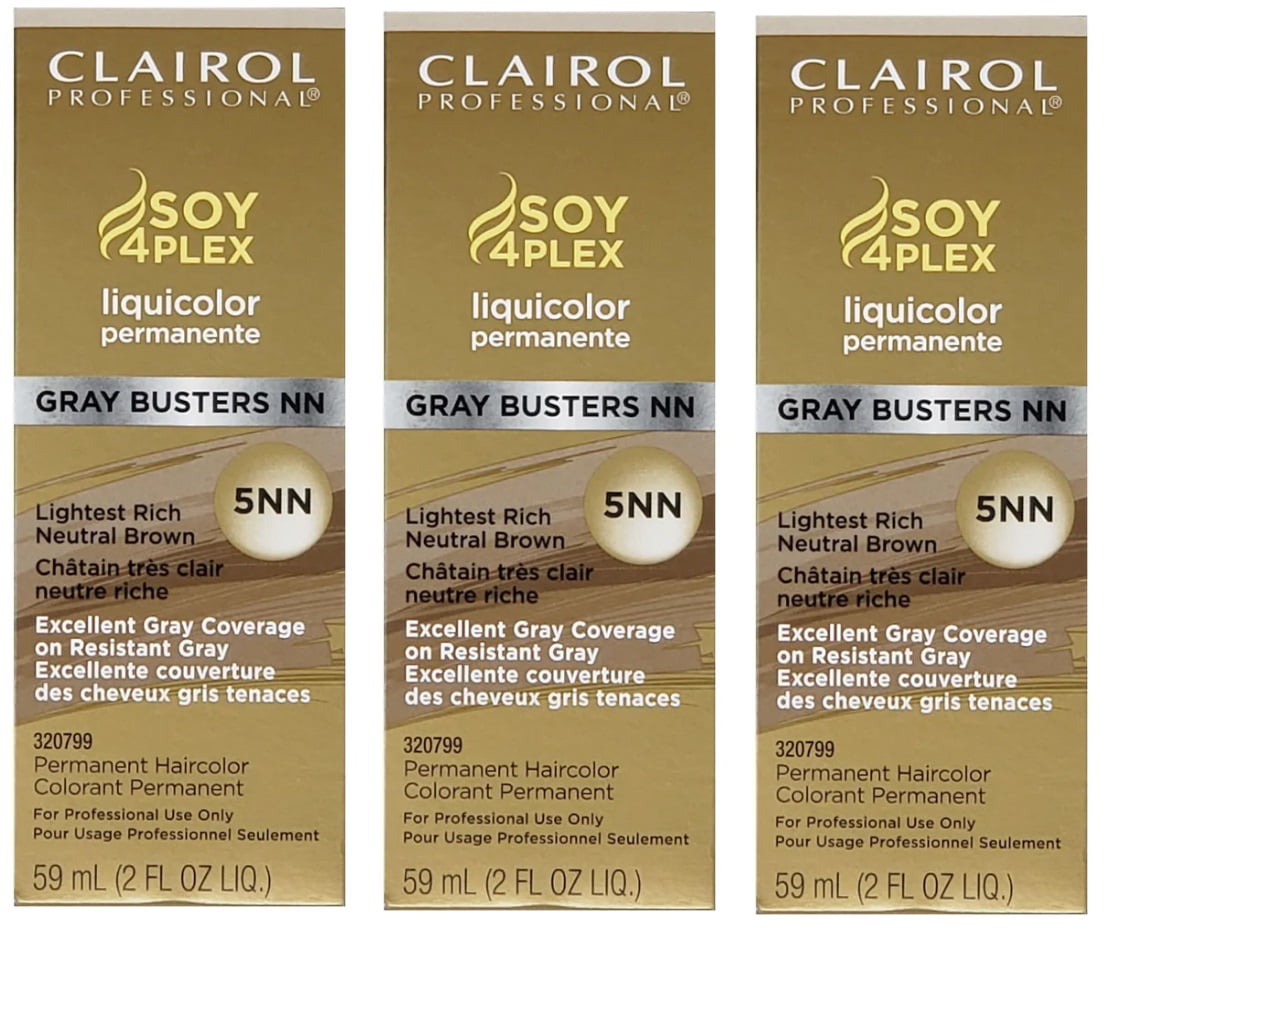 8. Clairol Professional Soy4Plex Liquicolor Permanent Hair Color, 9AA/20D Very Light Ultra Cool Blonde - wide 3